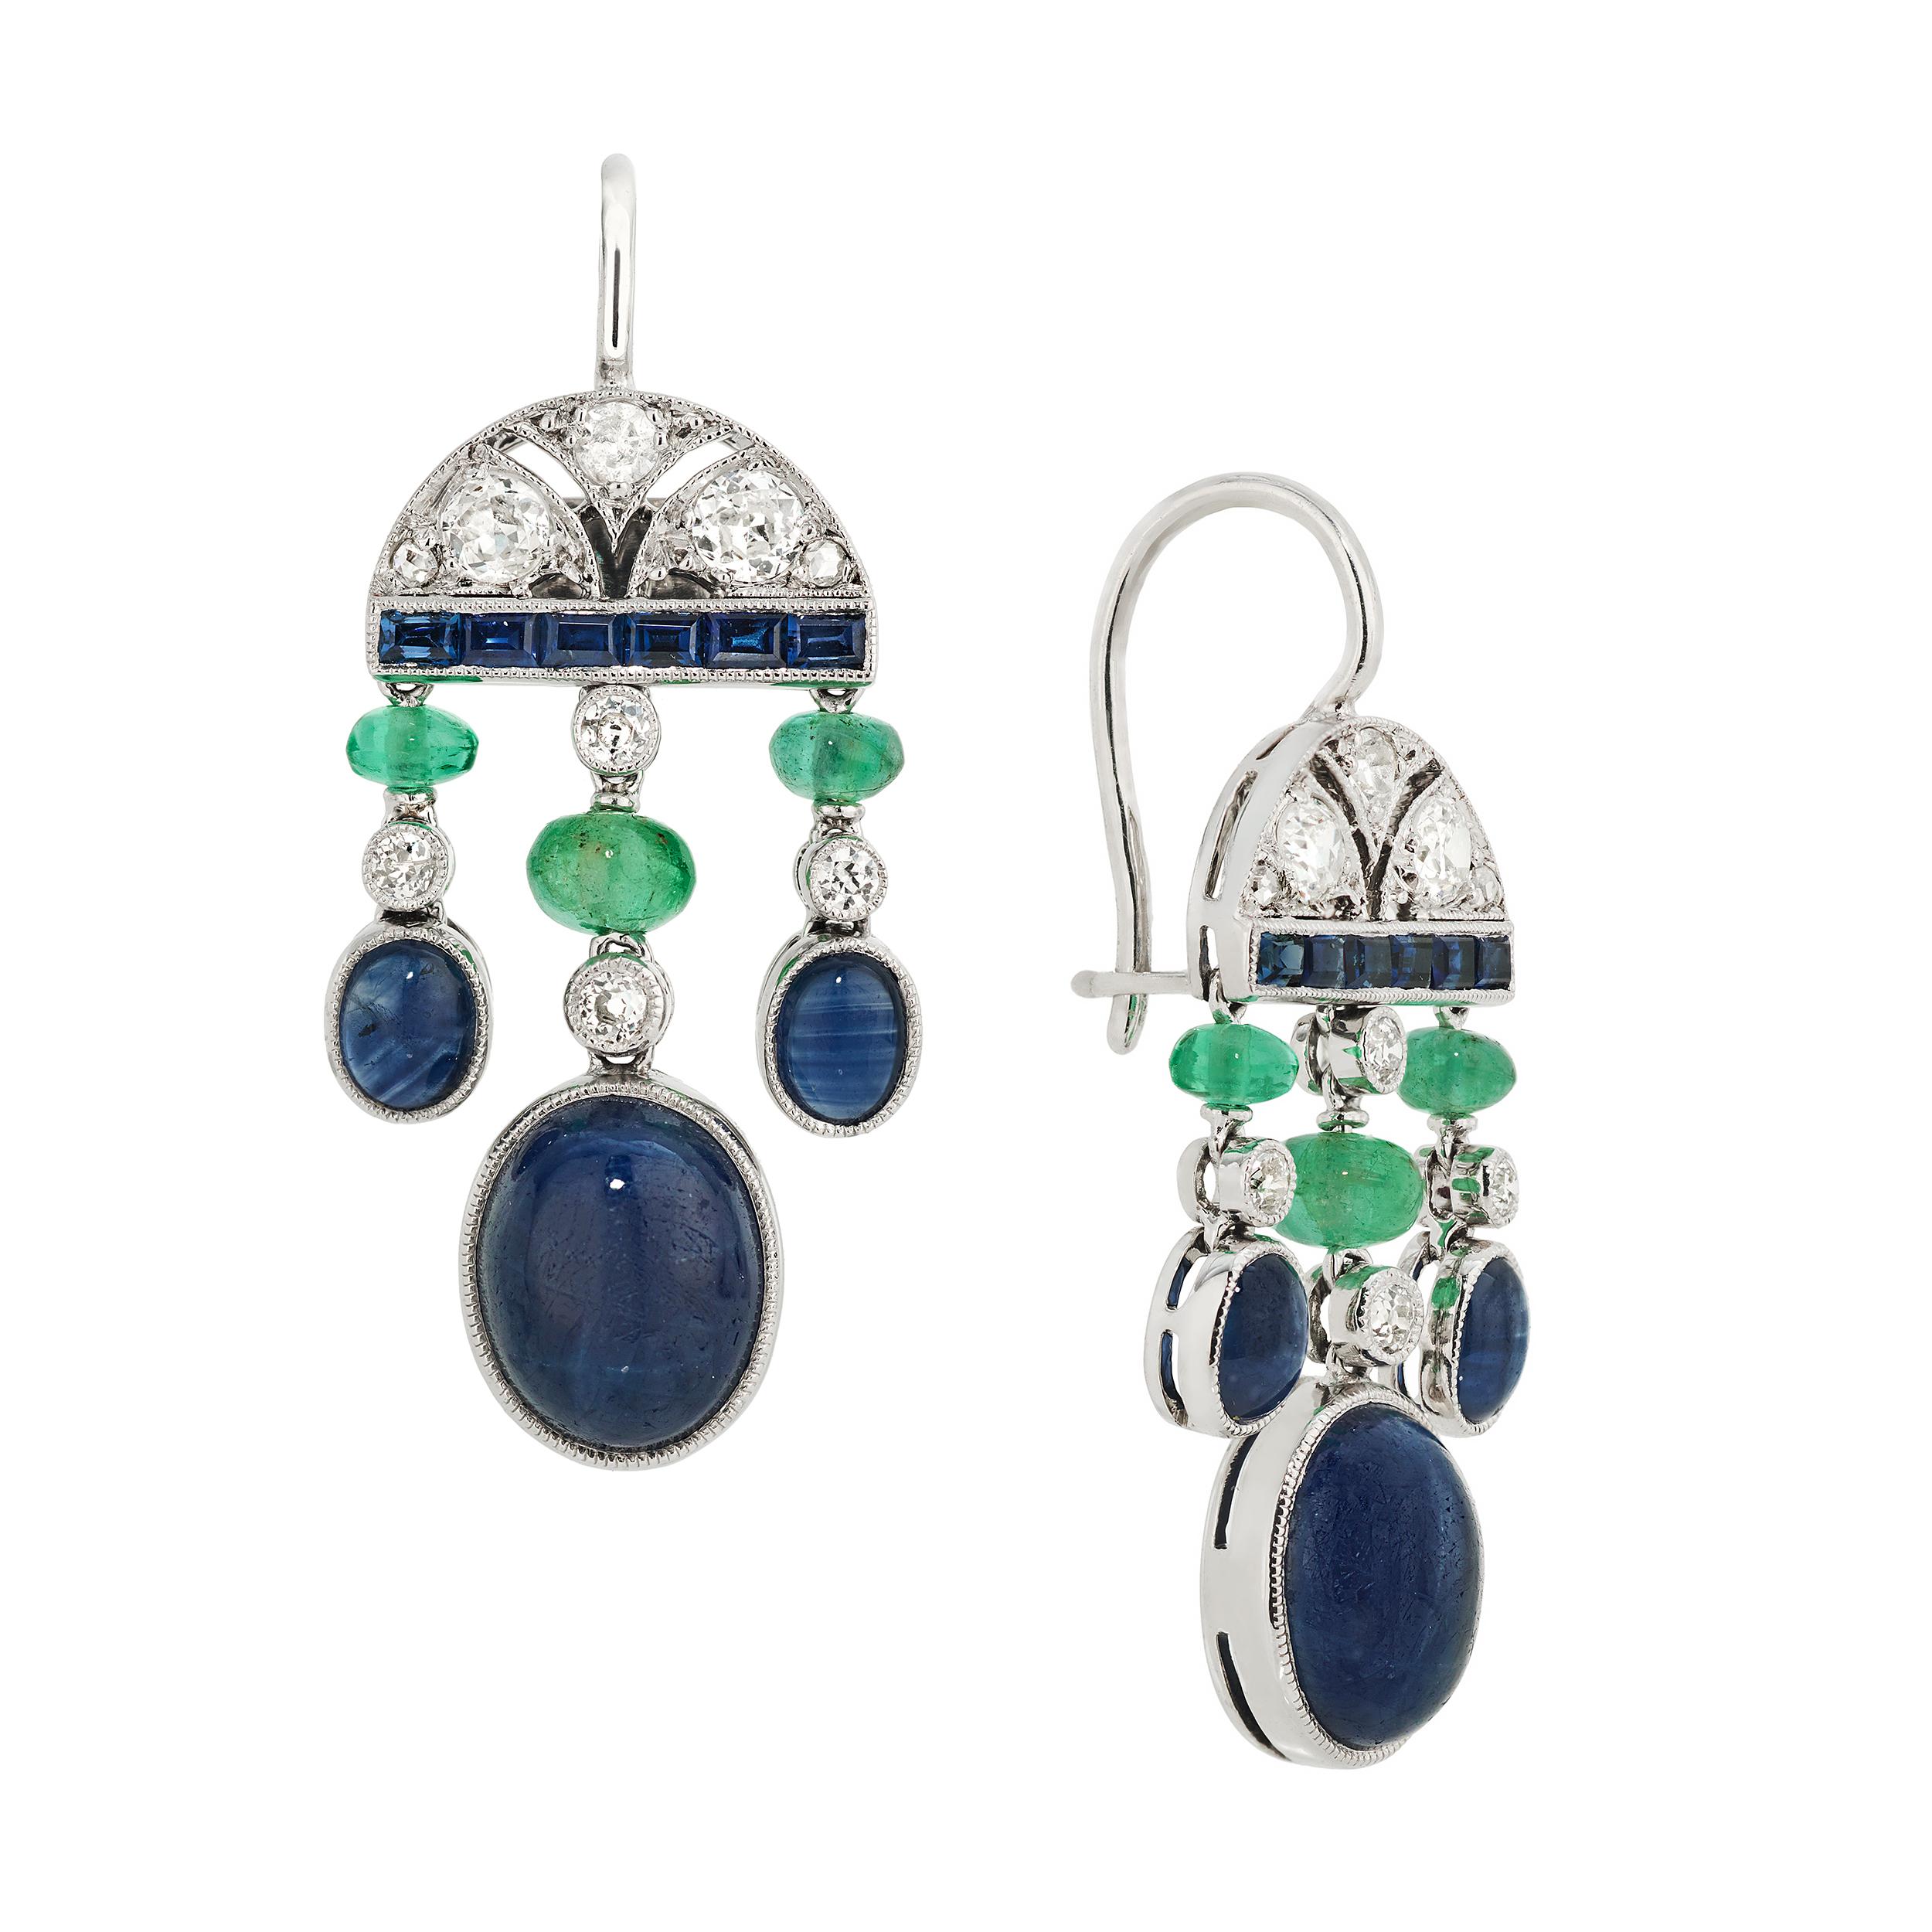 These gorgeous earrings were imagined by the designer alongside a 5-strand necklace also in Sapphires and Emeralds to be found in another listing.

The top of the earrings feature an Art Deco Design in Diamonds and is finished with a line of French